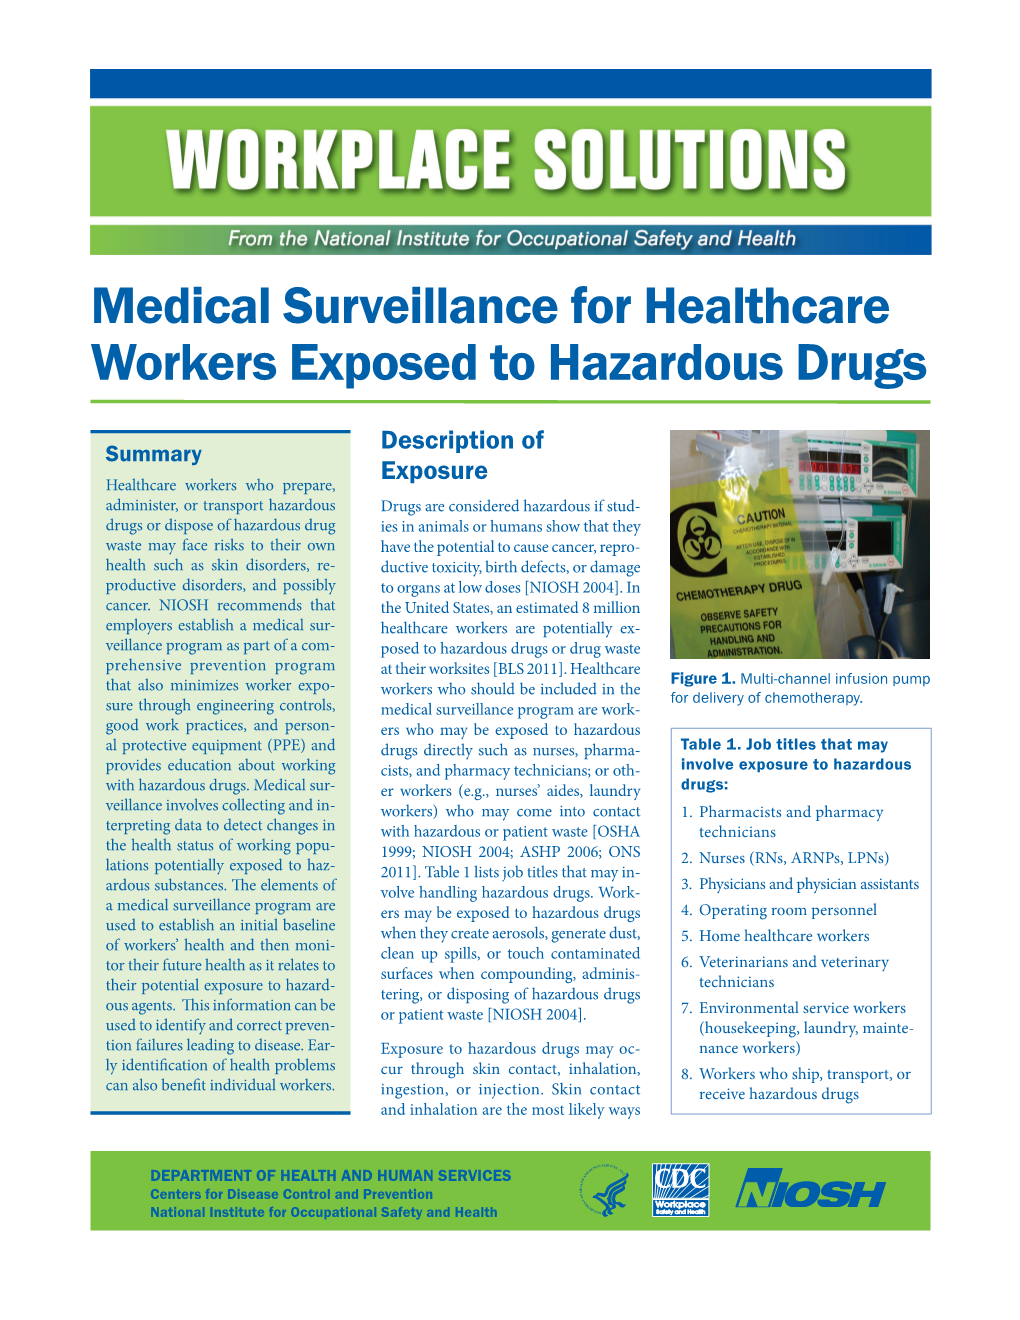 Medical Surveillance for Healthcare Workers Exposed to Hazardous Drugs